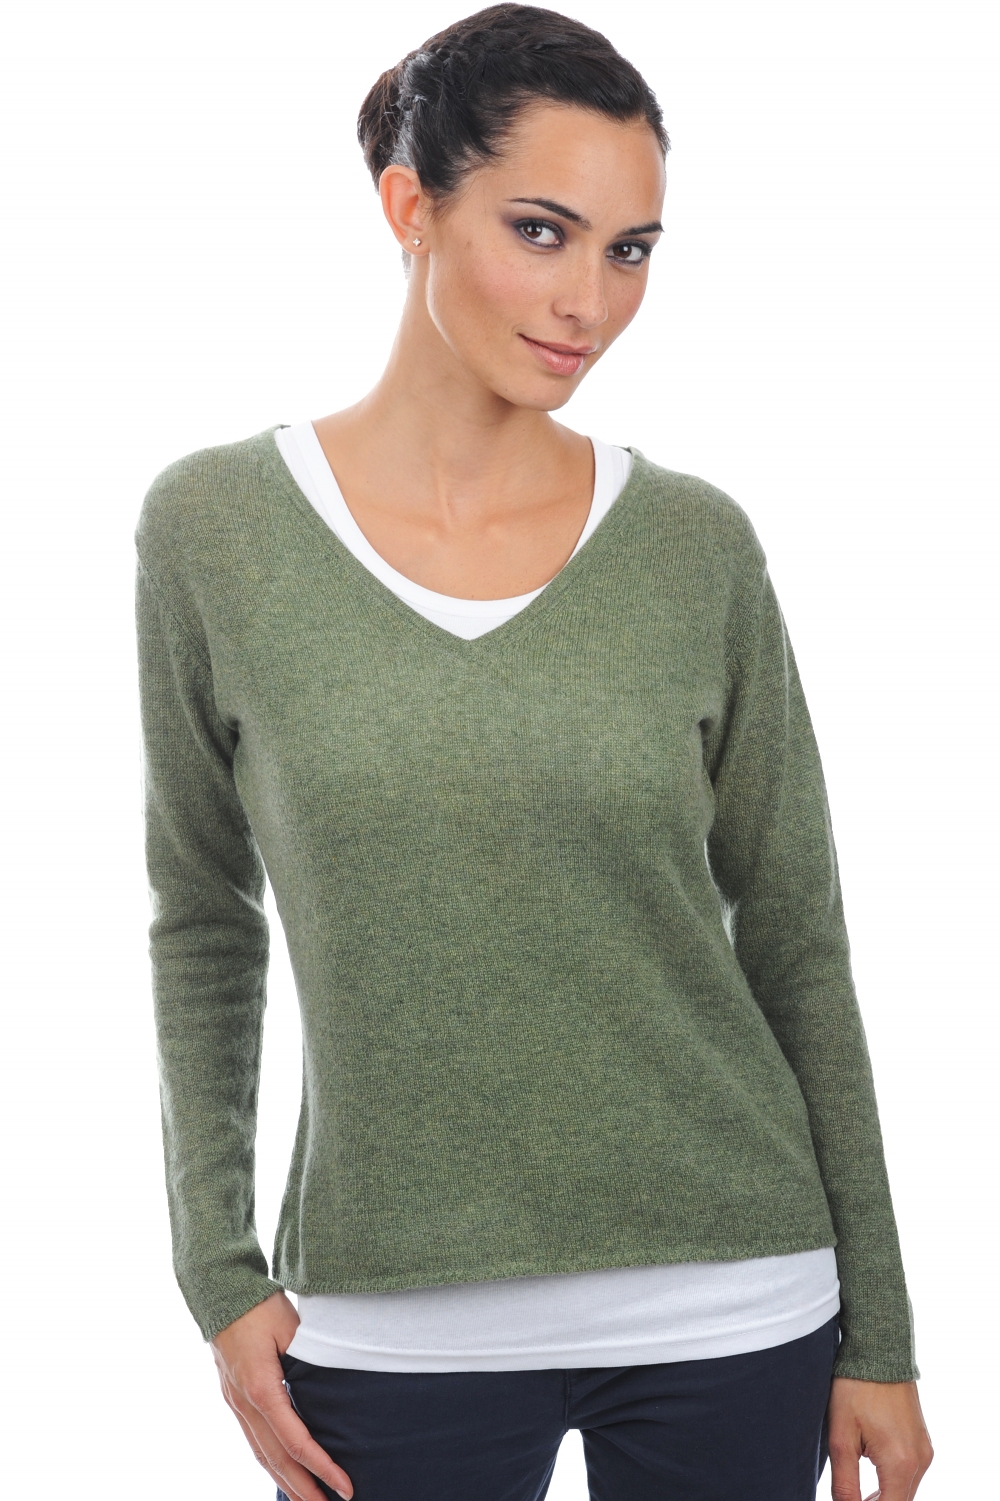 Cashmere ladies basic sweaters at low prices flavie olive chine 4xl